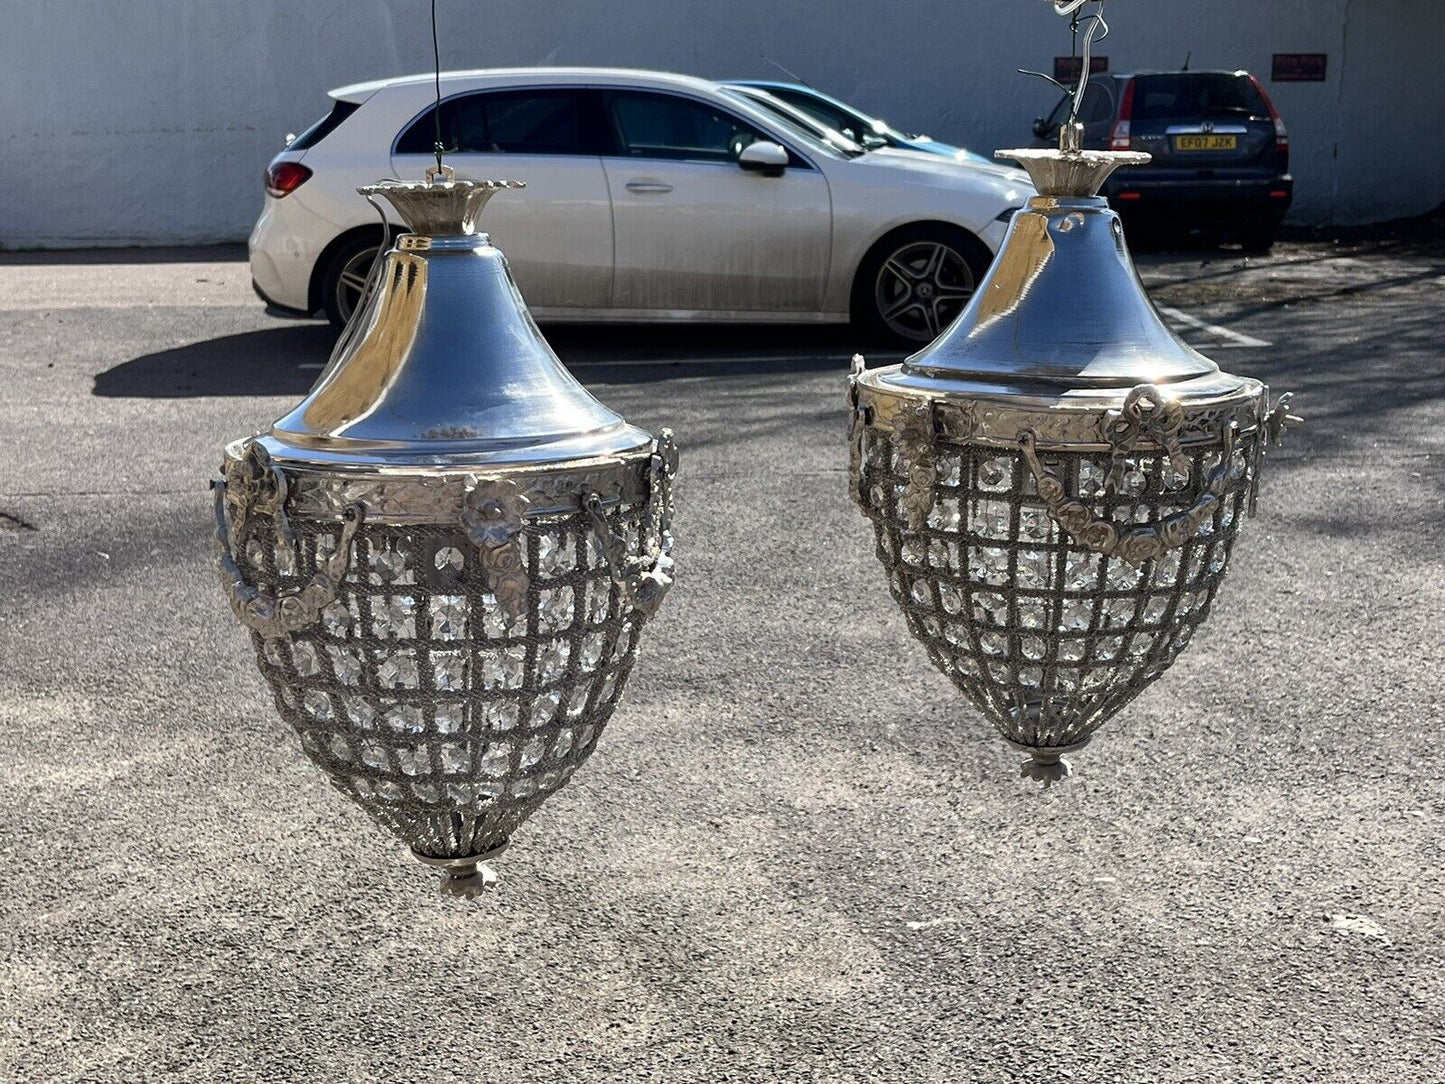 Pair of Chrome Ceiling Chandelier lights.